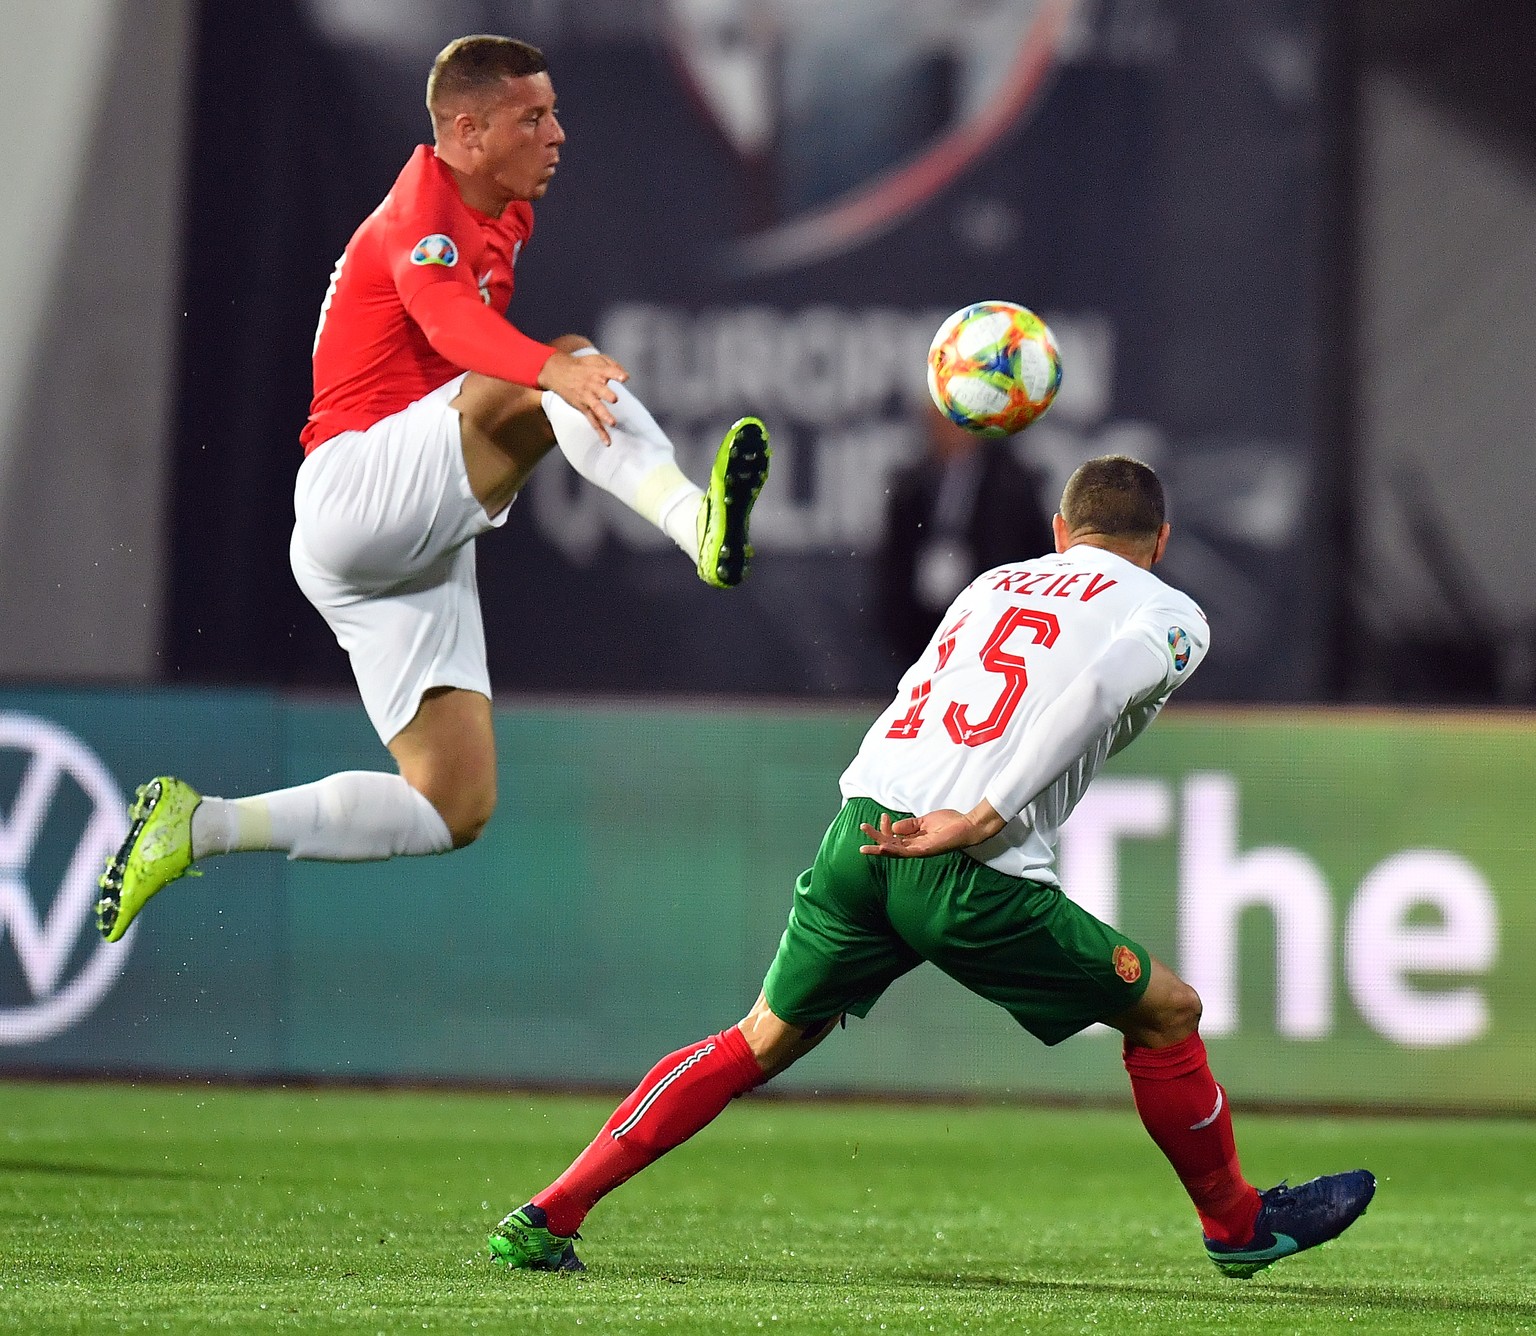 epa07920918 Ross Barkley (L) of England in action against Georgi Terziev (R) of Bulgaria during the UEFA EURO 2020 qualifying group A soccer match between Bulgaria and England, in Sofia, Bulgaria 14 O ...